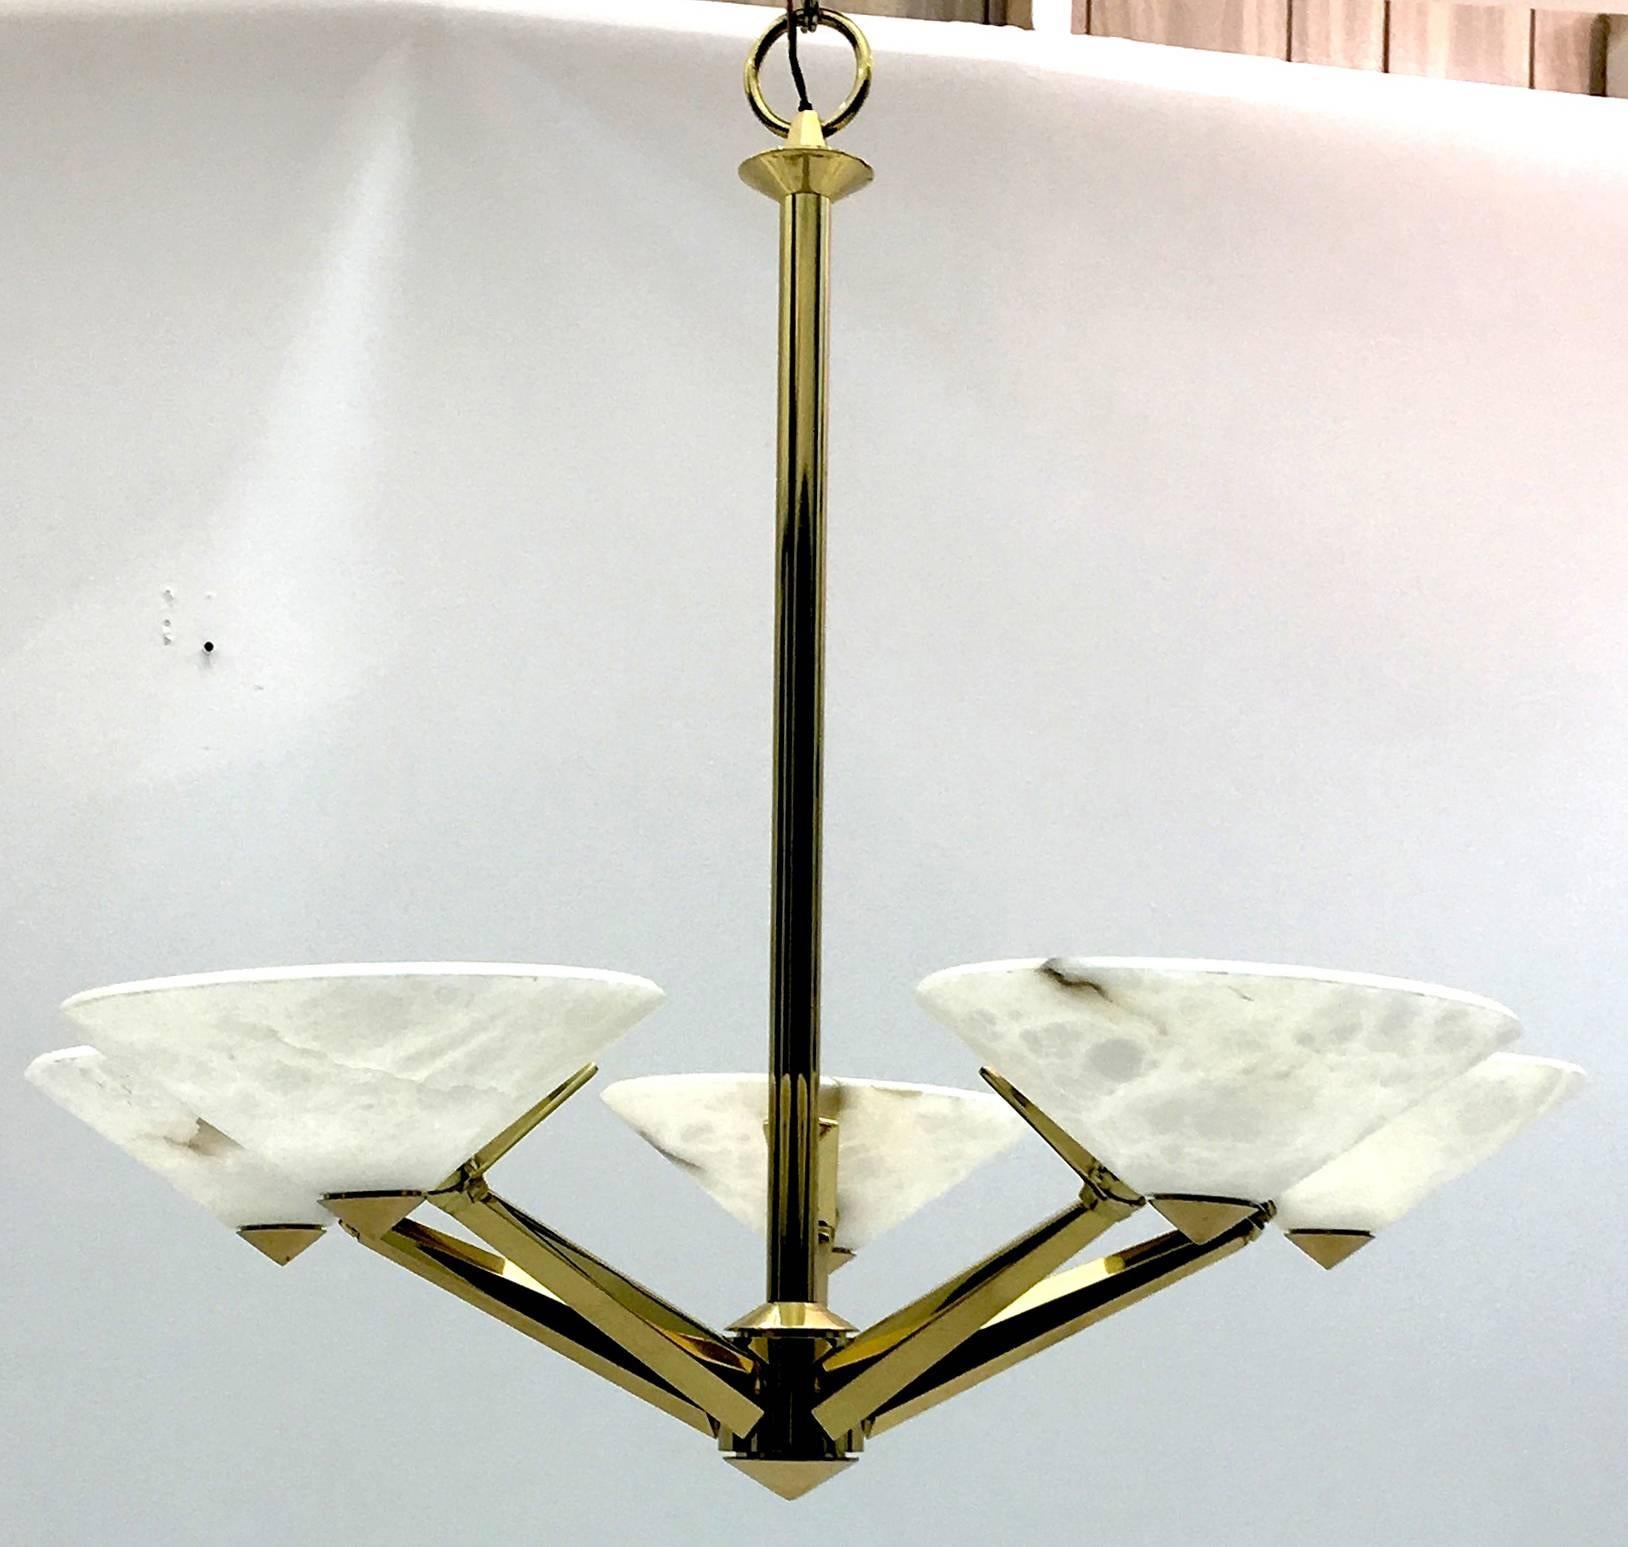 This vibrant chandelier from Lightolier not only imparts a Mid-Century modern flair; it also carries Art Deco qualities in its sunburst pattern with bevelled edges and alabaster shades rather than glass.

As with all Lightolier products quality is